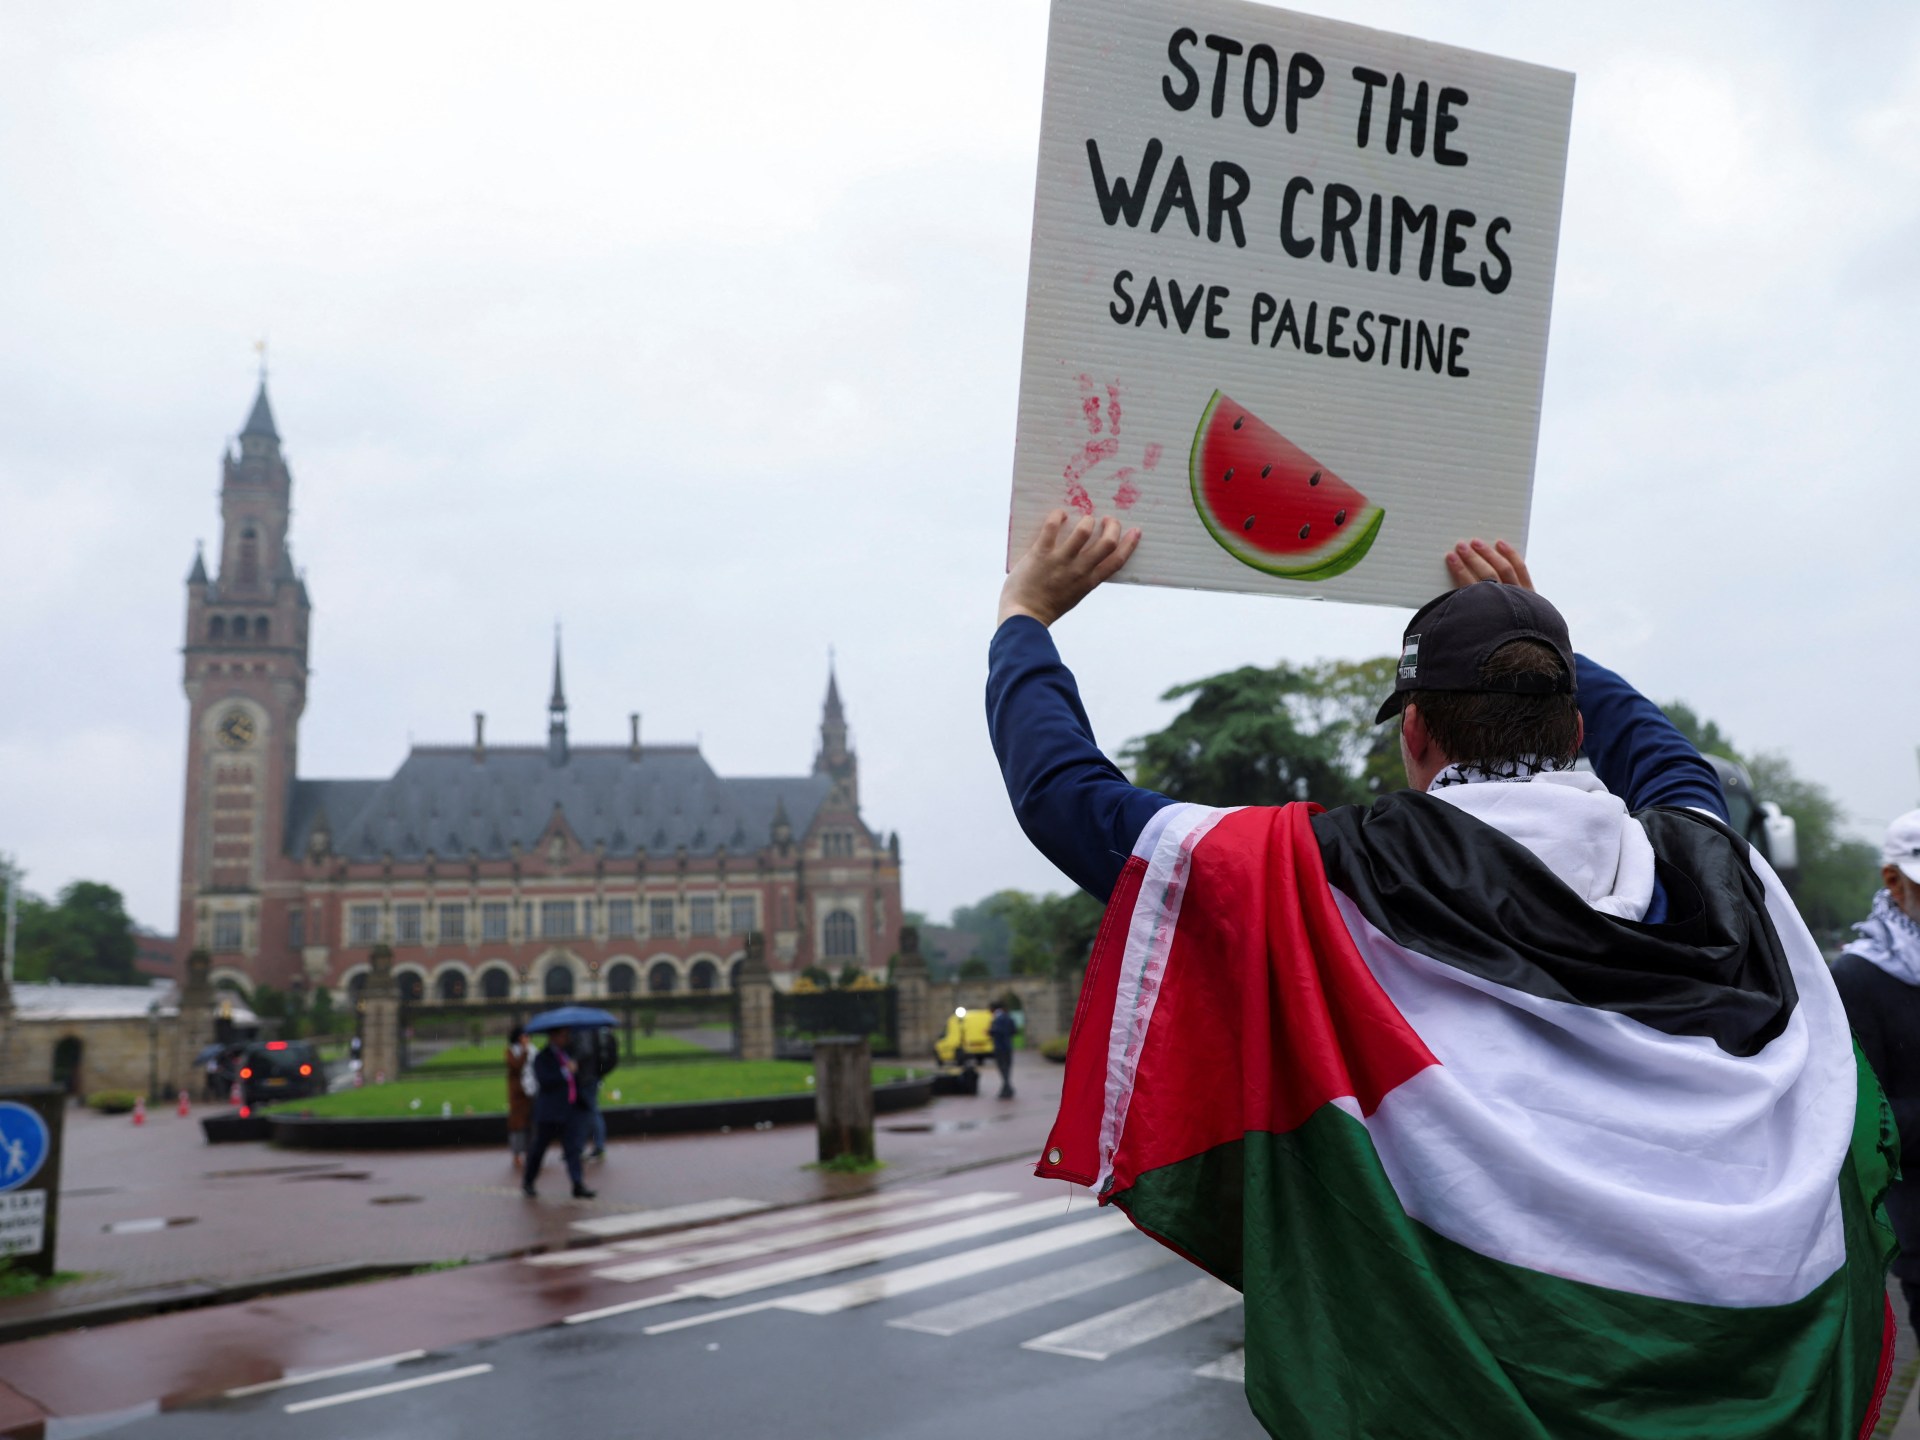 Palestinians urge world to end Israel’s illegal occupation after ICJ ruling | Israel-Palestine conflict News